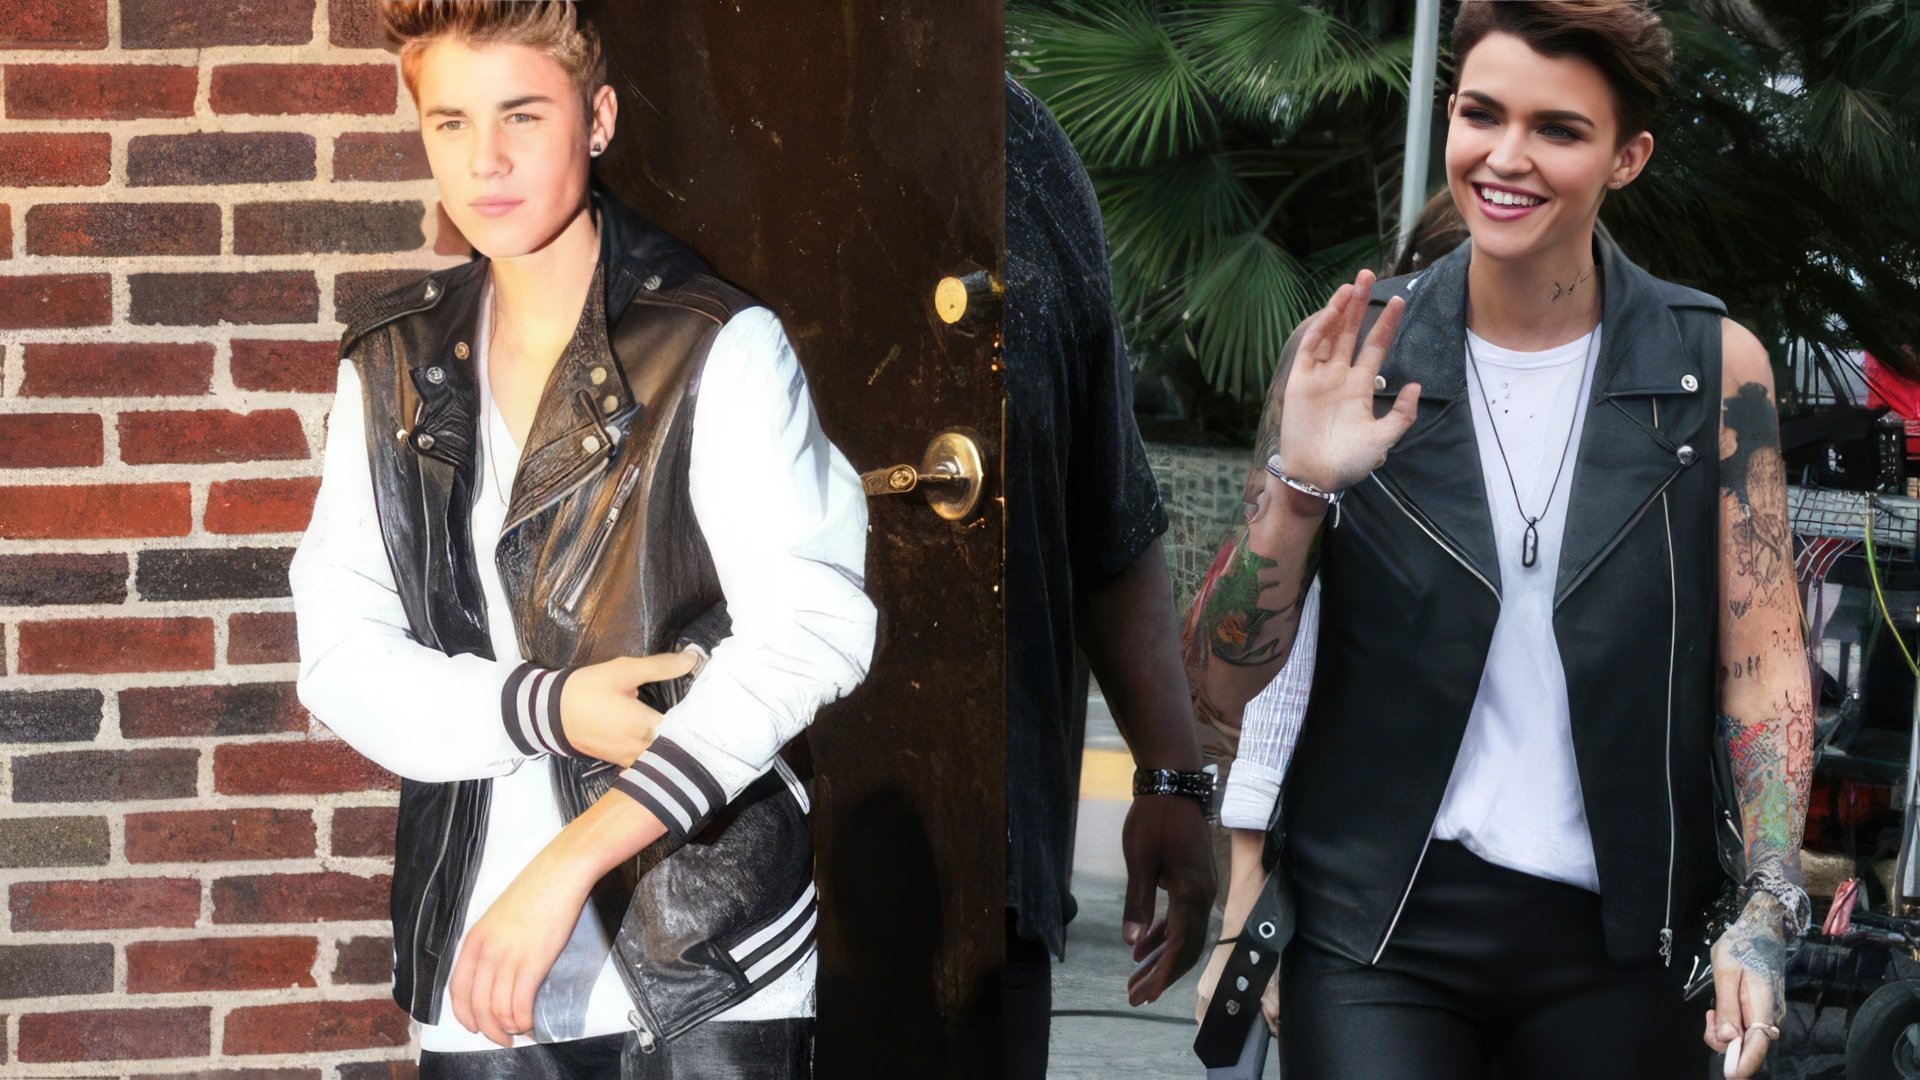 Ruby Rose is often compared to Justin Bieber